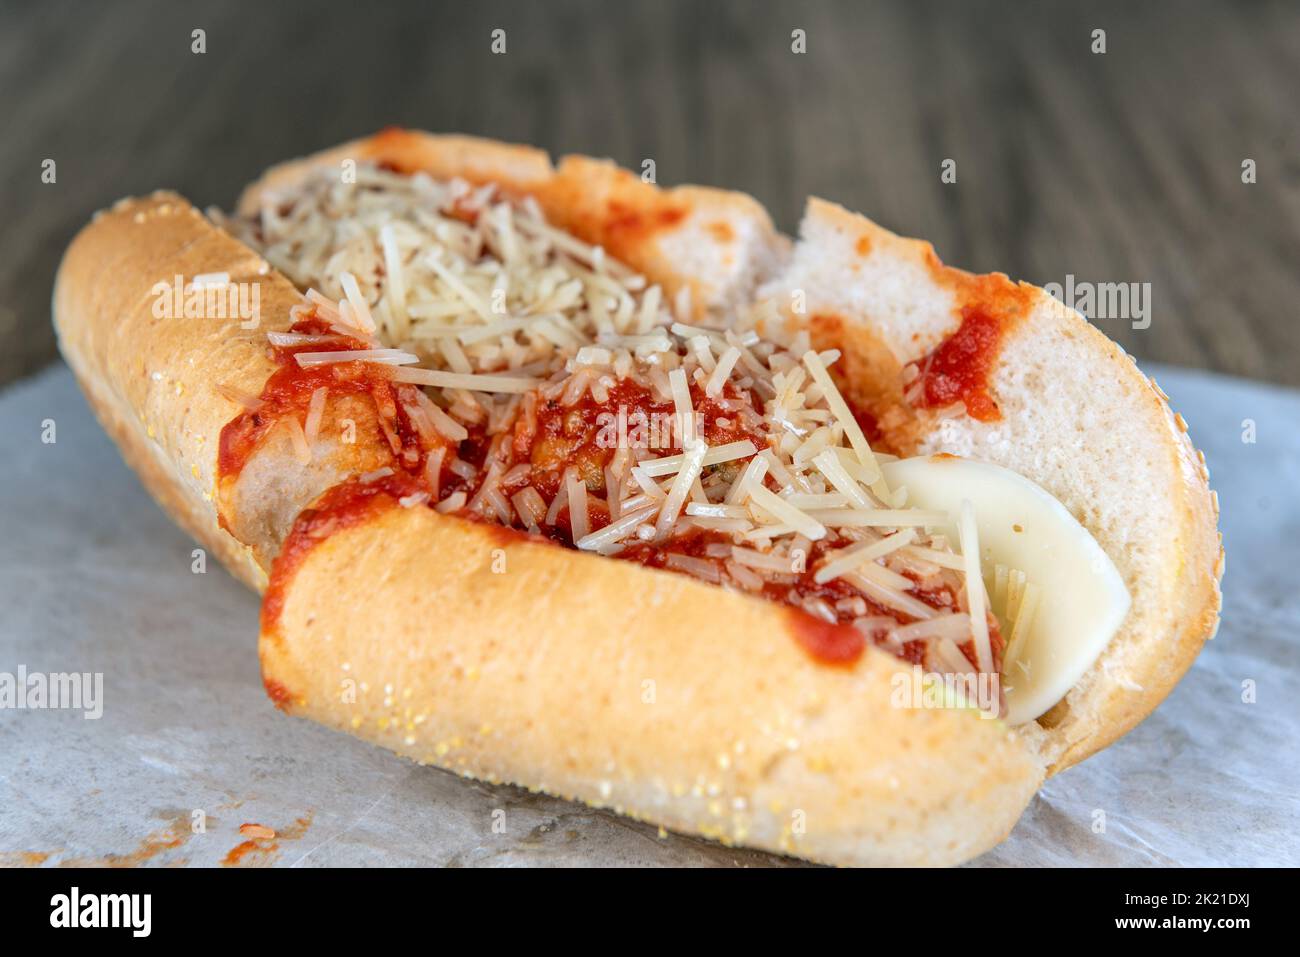 Lunch is served with a loaded meatball sandwich overflowing with provolone cheese. Stock Photo